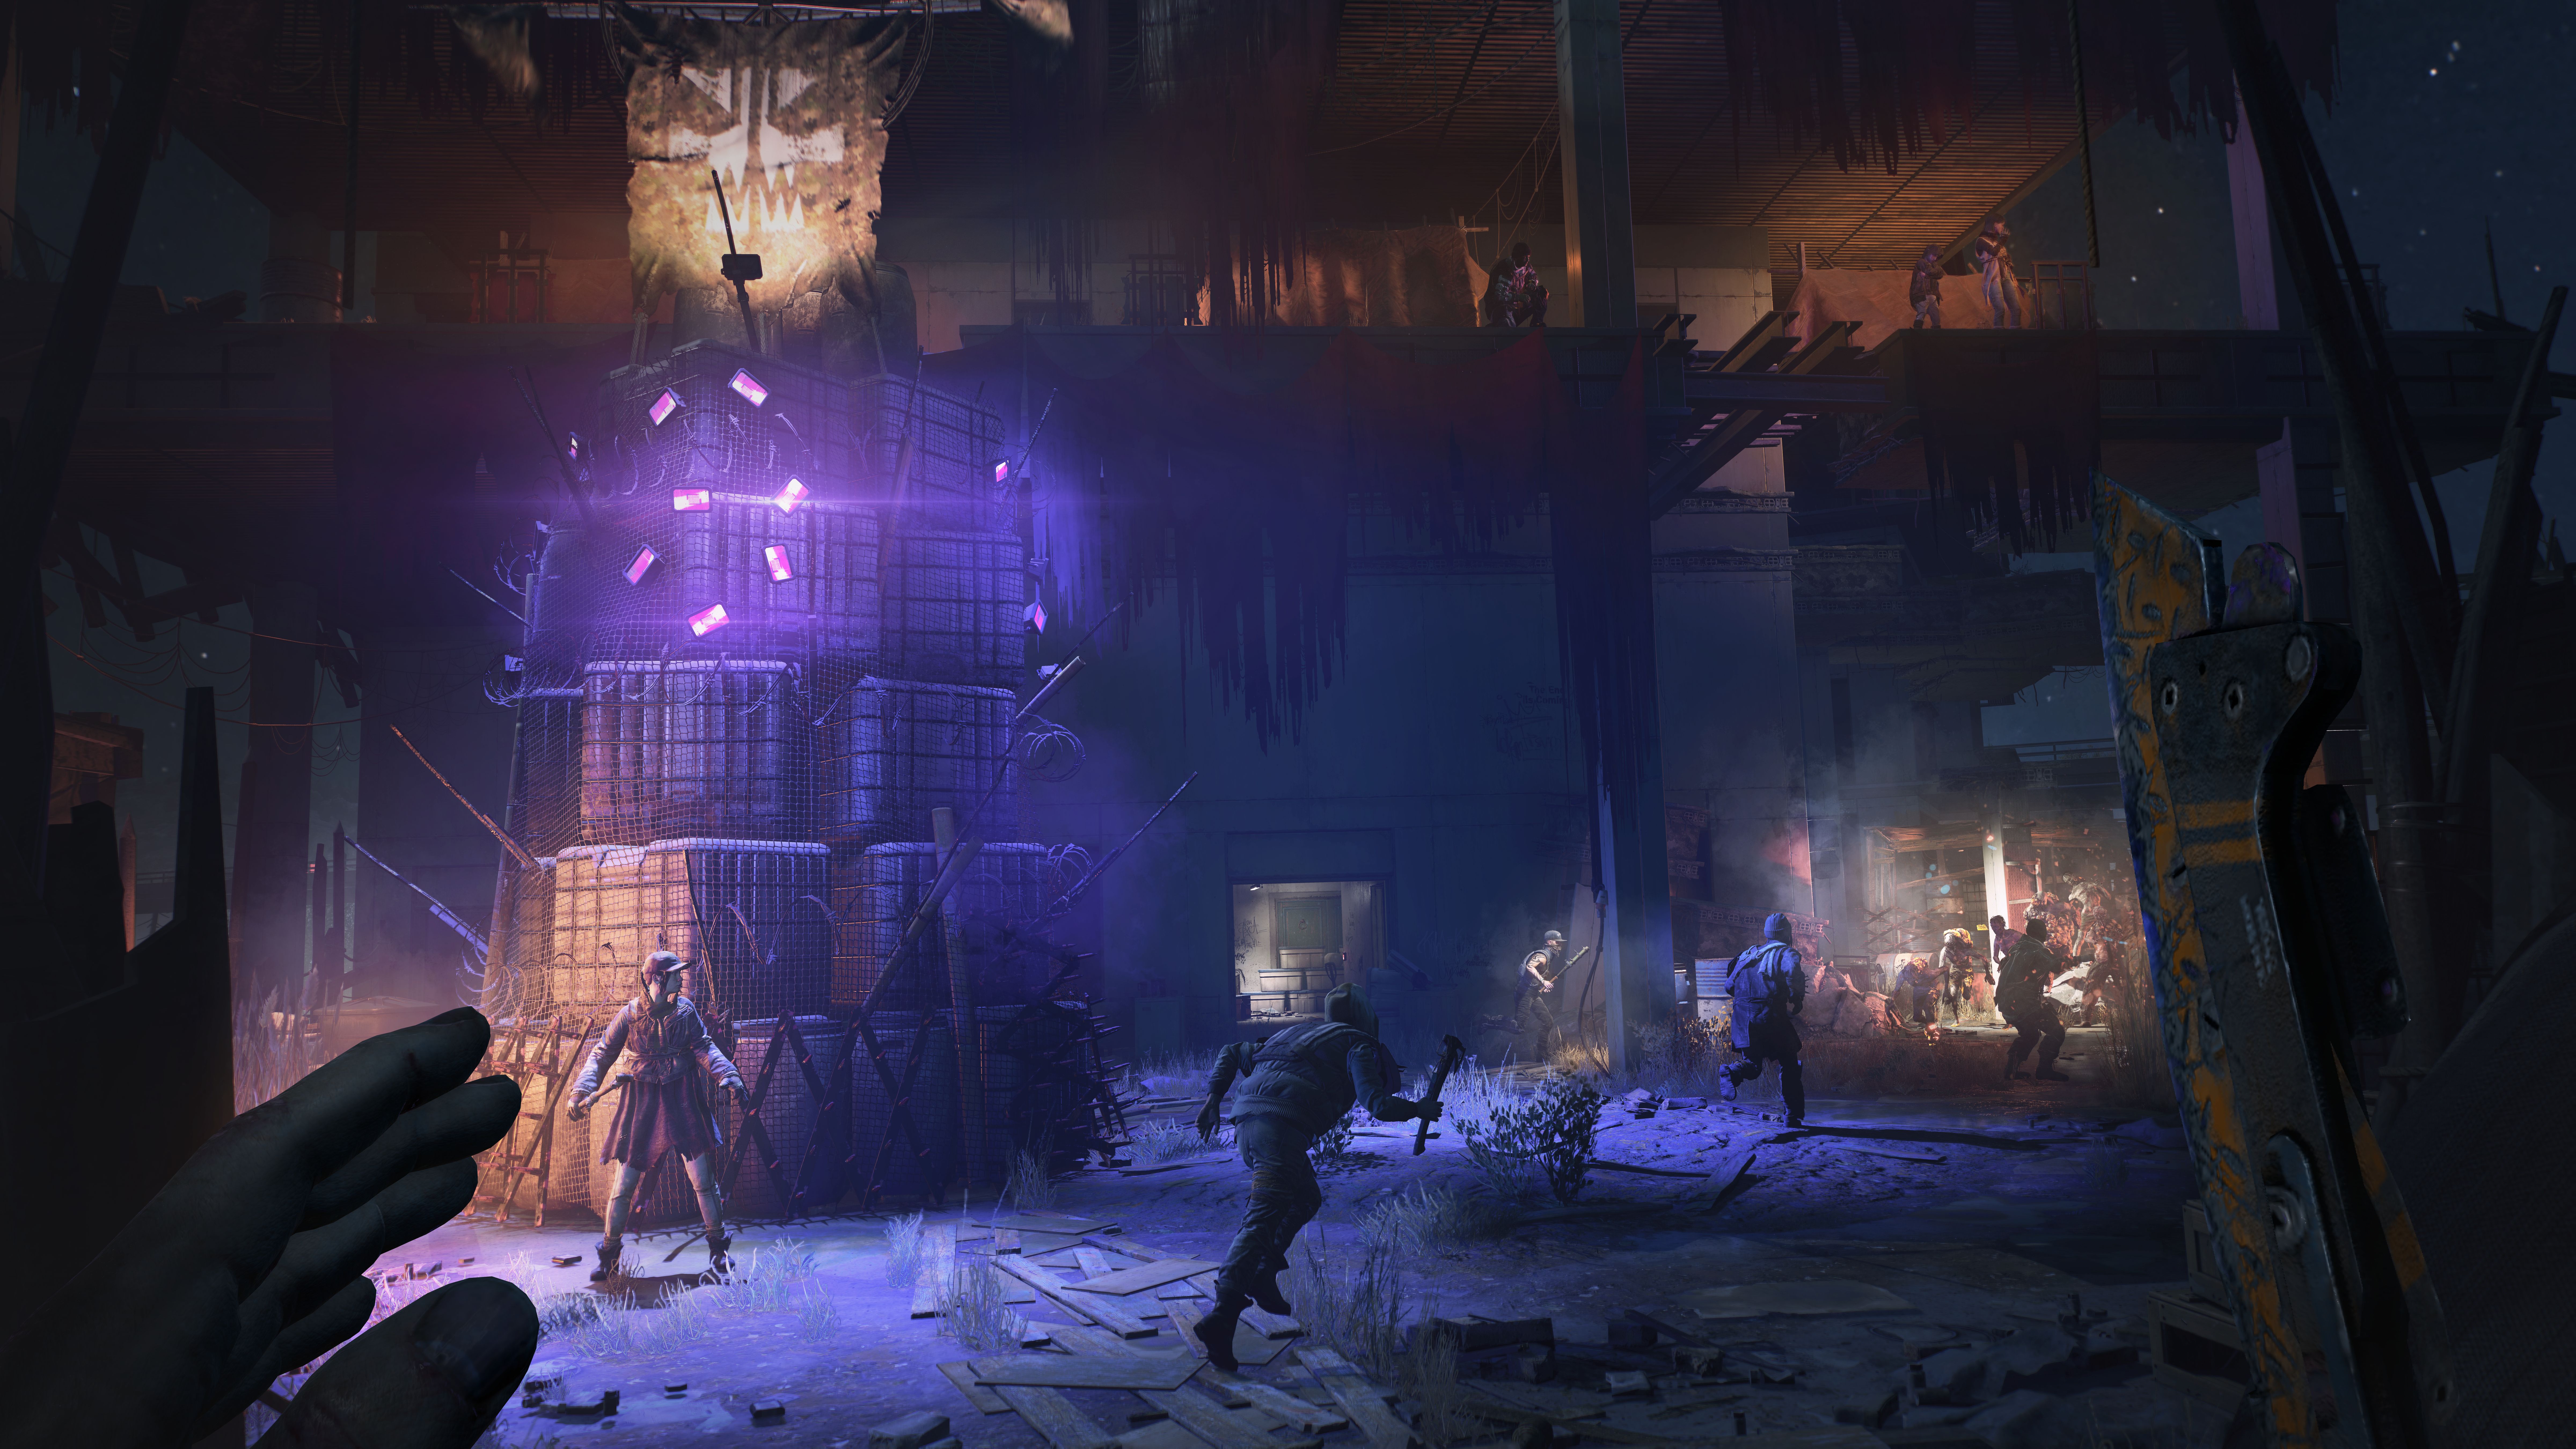 A promotional screenshot from a preview of Dying Light 2, showing the inside of a bandit hideout lit in purple, with a heap of storage crates piled into what looks like a kind of bad-guy Christmas tree